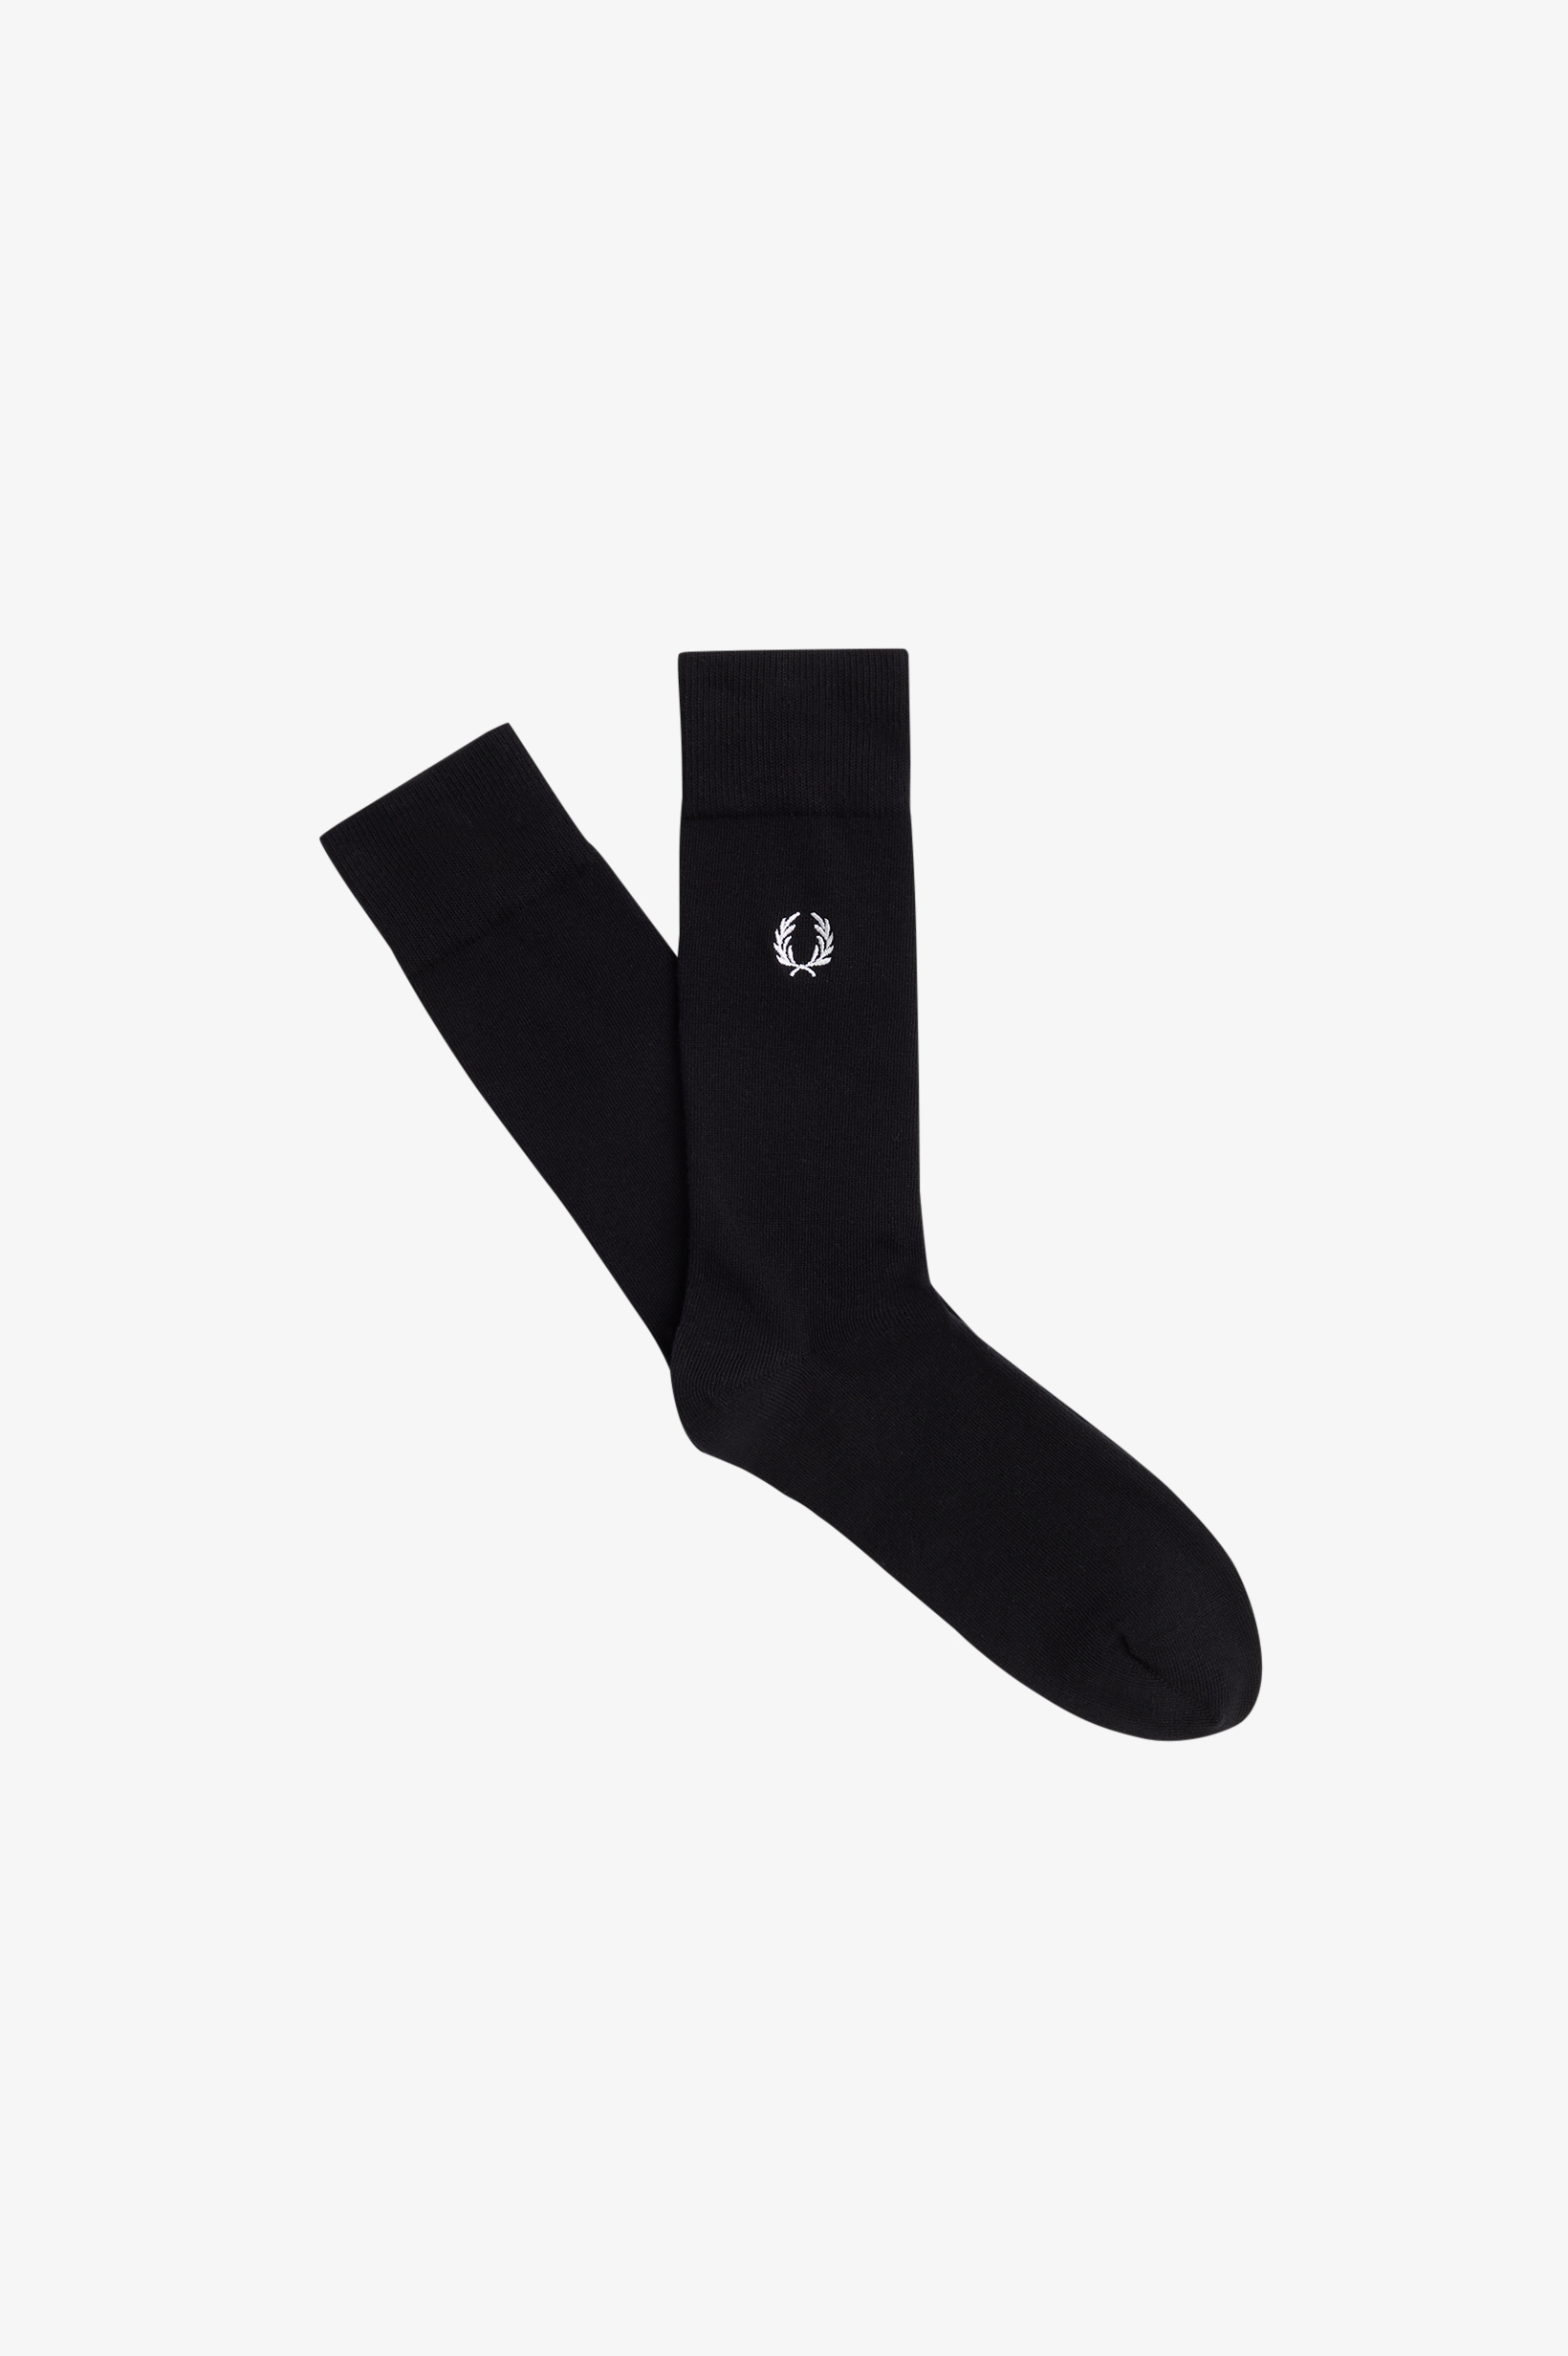 Fred Perry - CLASSIC LAUREL WREATH SOCK - Black/Snow White